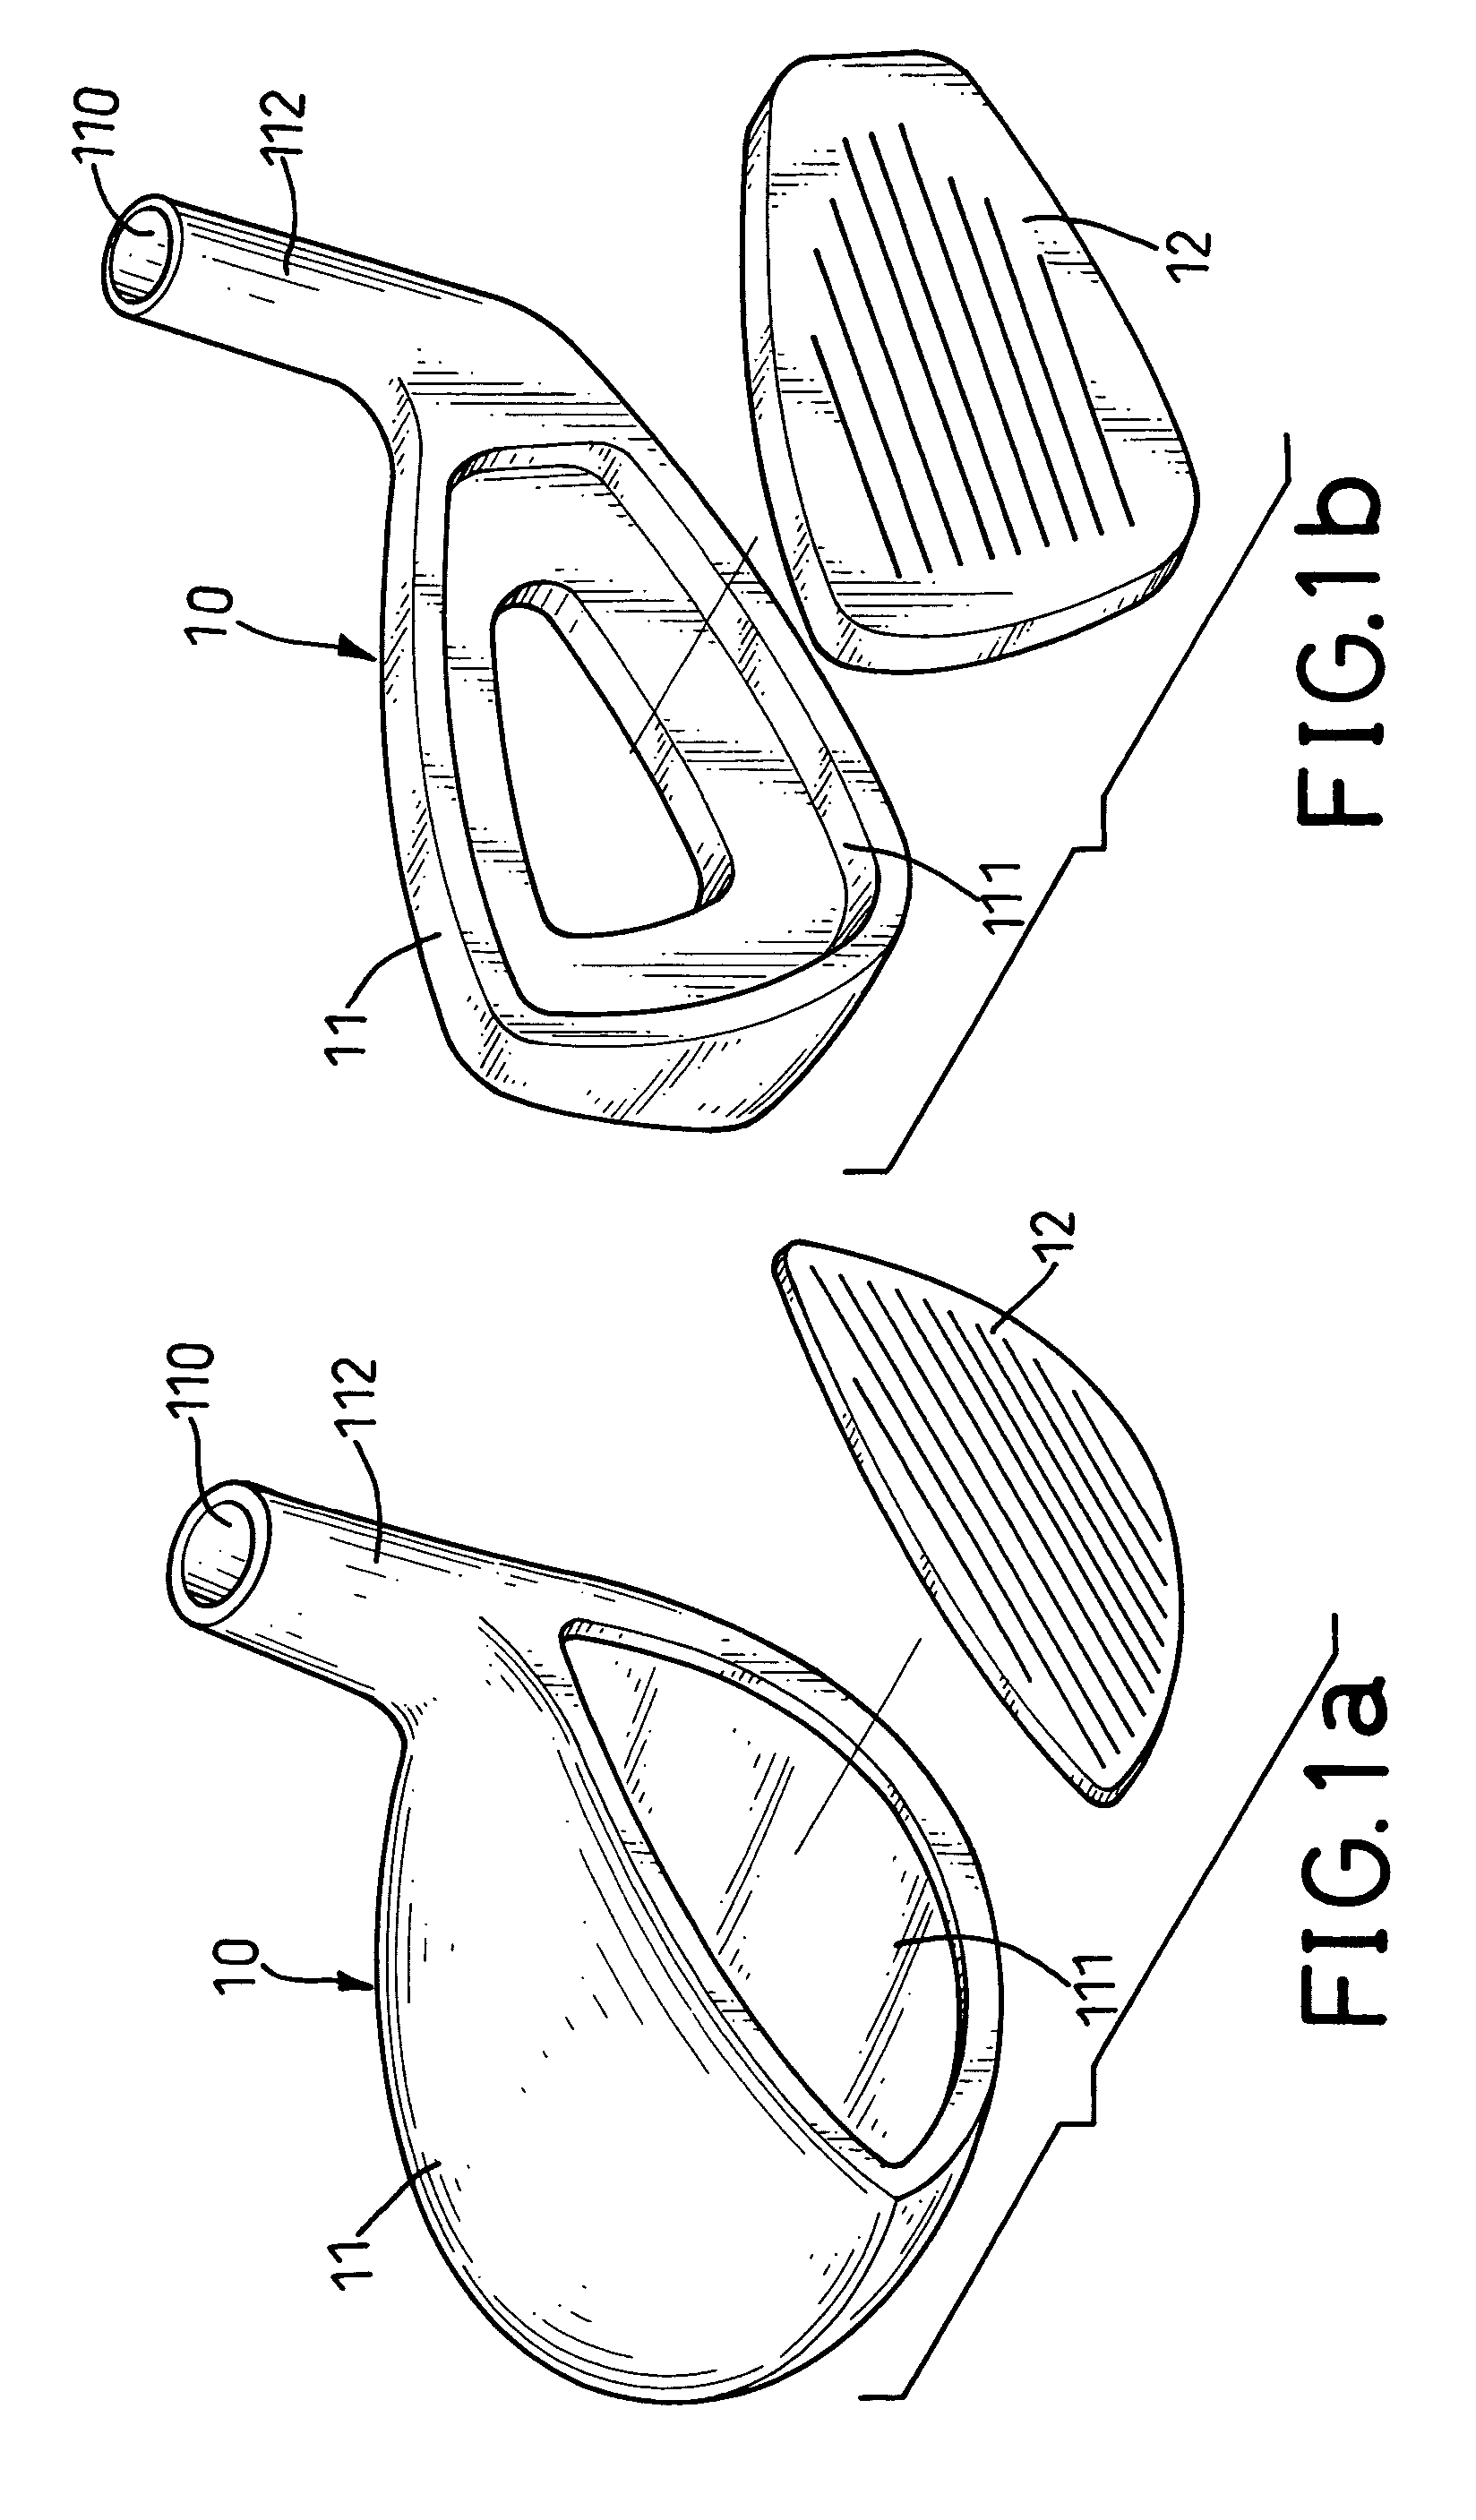 Golf club head and method of fabricating the same